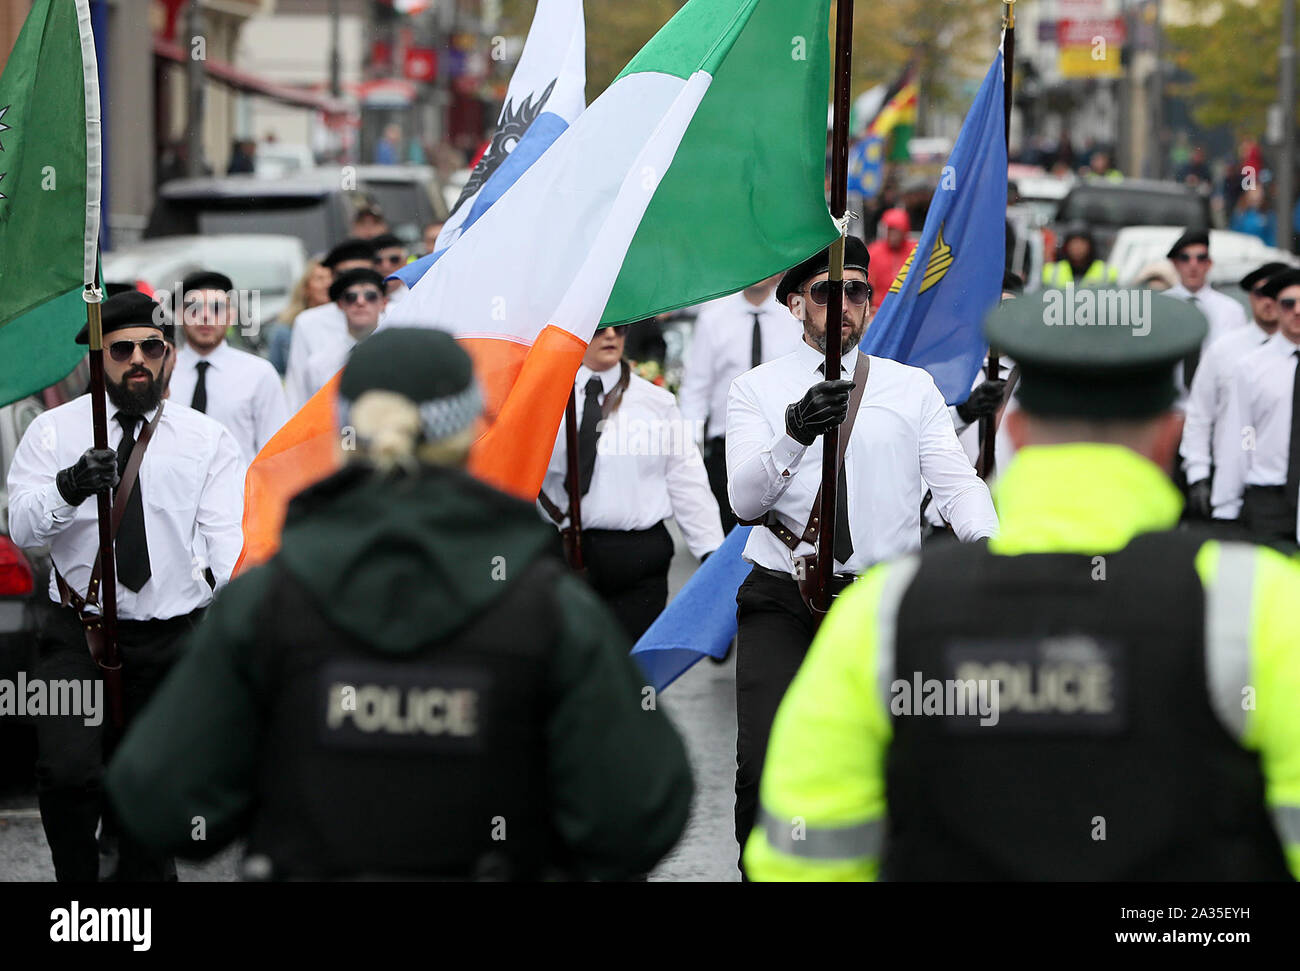 PSNI officers watch as a colour party takes part in a parade in Newry, Co Down. The political party Saoradh had organised the parade to commemorate hunger strikes. Stock Photo